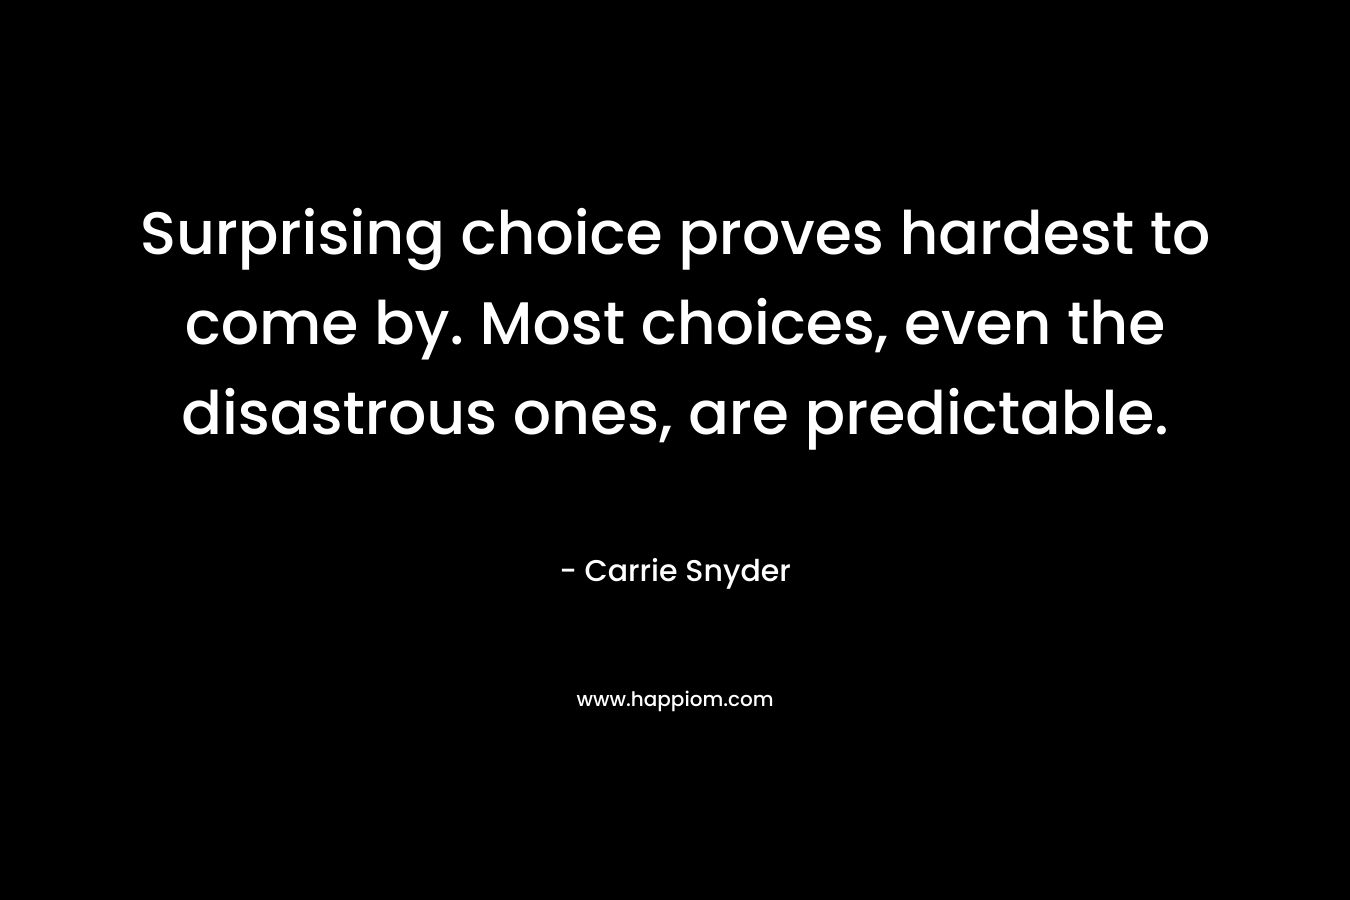 Surprising choice proves hardest to come by. Most choices, even the disastrous ones, are predictable. – Carrie Snyder